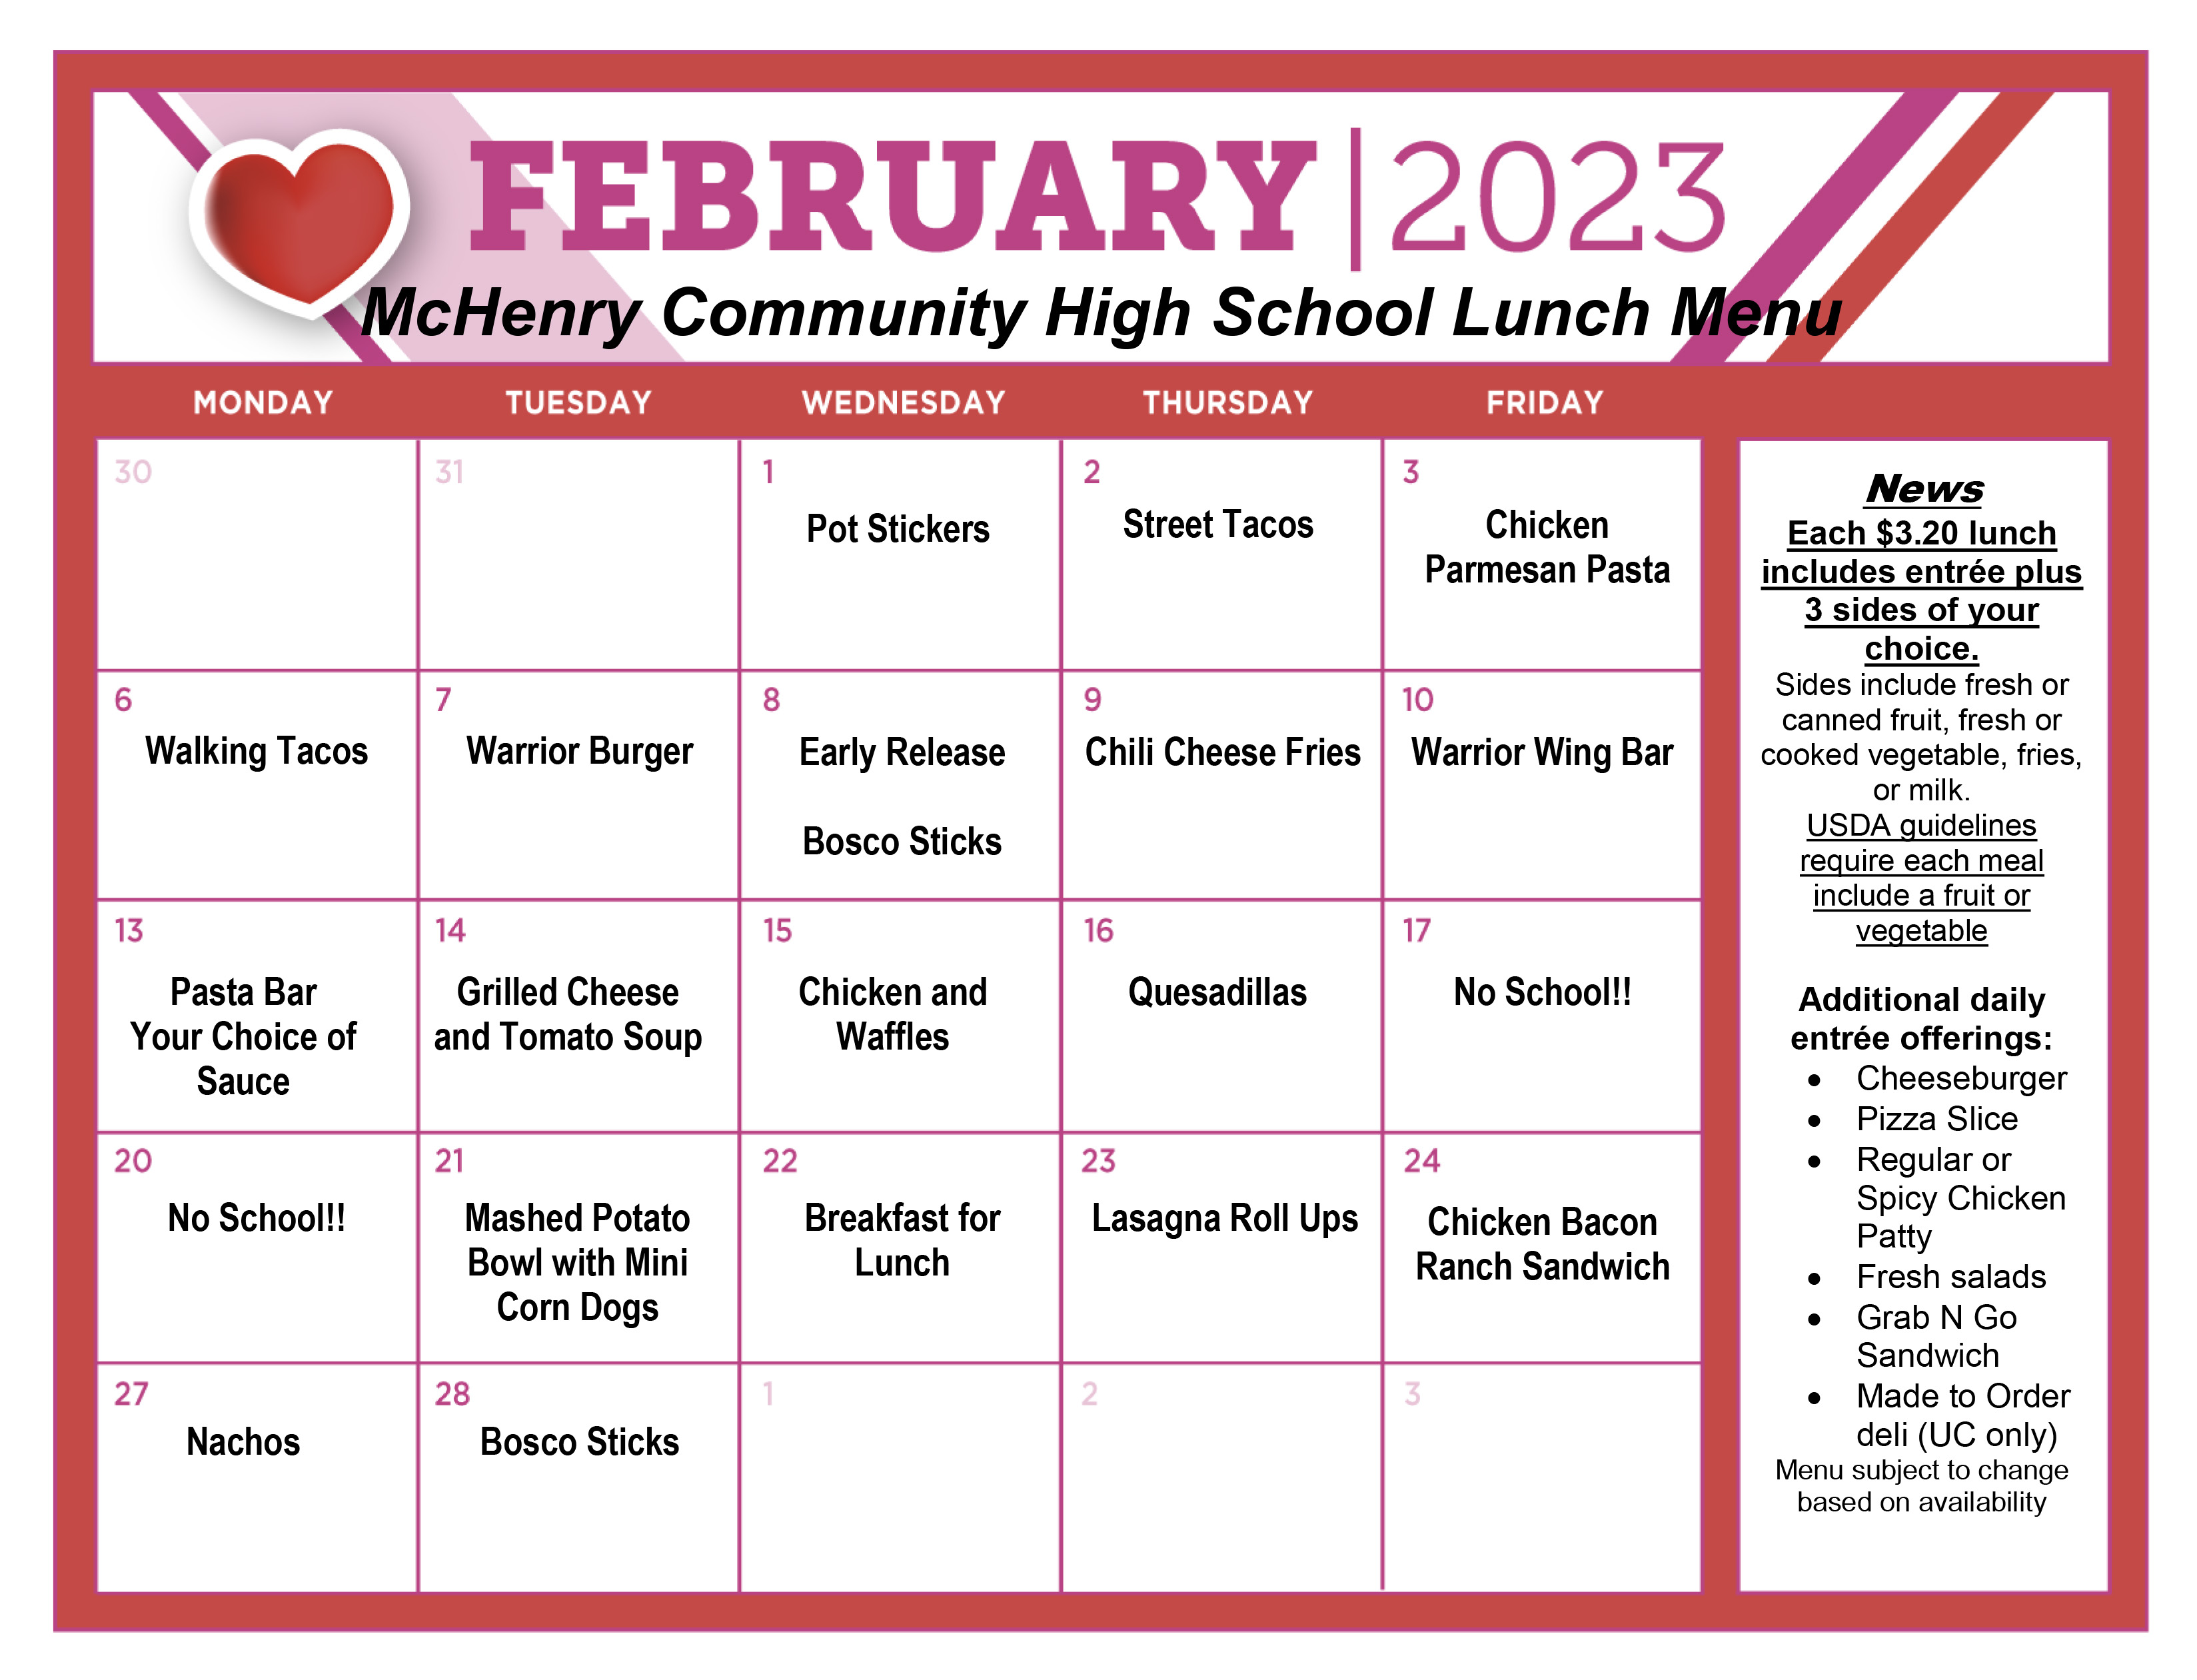 February 2023 McHenry Community High School Wednesday February 1: Pot Stickers Thursday, February 2: Street Tacos. Friday February 3: Chicken parmesan pasta, Monday February 6: Walking tacos, Tuesday, February 7: Warrior Burger Wednesday February 8: Early Release Bosco sticks, Thursday February 9: Chili Cheese Fries Friday, February 10: Warrior Wing Bar, Monday February 13: Pasta bar your choice of sauce.  Tuesday, February 13: grilled cheese and tomato soup, Wednesday February 15: chicken and waffles, Thursday, February 16: Quesadillas, Friday, February 17: no school, Monday, February 20: No School, Tuesday February 21: Mashed potato bowl with mini corn dogs, Wednesday February 22: Breakfast for lunch, Thursday, February 23: lasagna roll ups, Friday, February 24; Chicken bacon ranch sandwich, Monday, February 27: Nachos, Tuesday, February 28: Bosco sticks. News each 3.20 lunch includes entree plus 3 sides of your choice Sides include fresh or canned fruit, fresh or cooked vegetable, fries or milk. USDA guidelines require each meal include a fruit or vegetable. Additional daily entree offerings: cheeseburger, pizza slice, regular or spicy chicken patty, fresh salads, Grab N Go sandwich, Made to order deli (UC only) Menu subject to change based on availability 